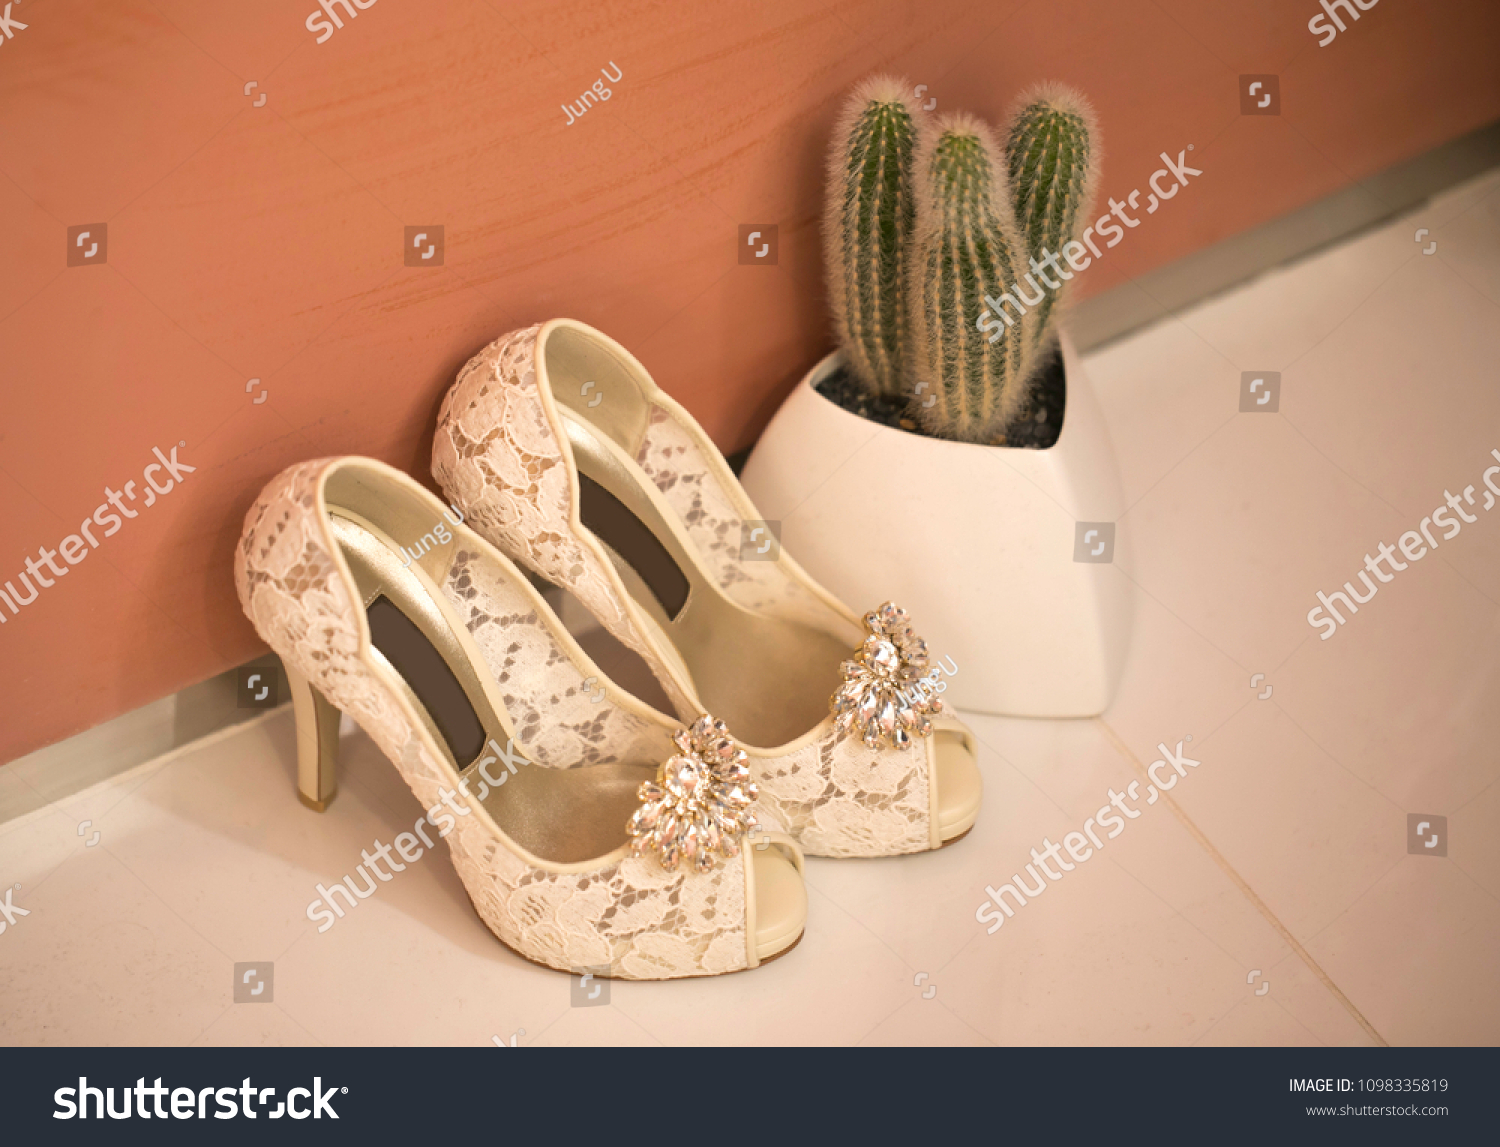 Pink shoes and wedding shoes next to cactus #1098335819